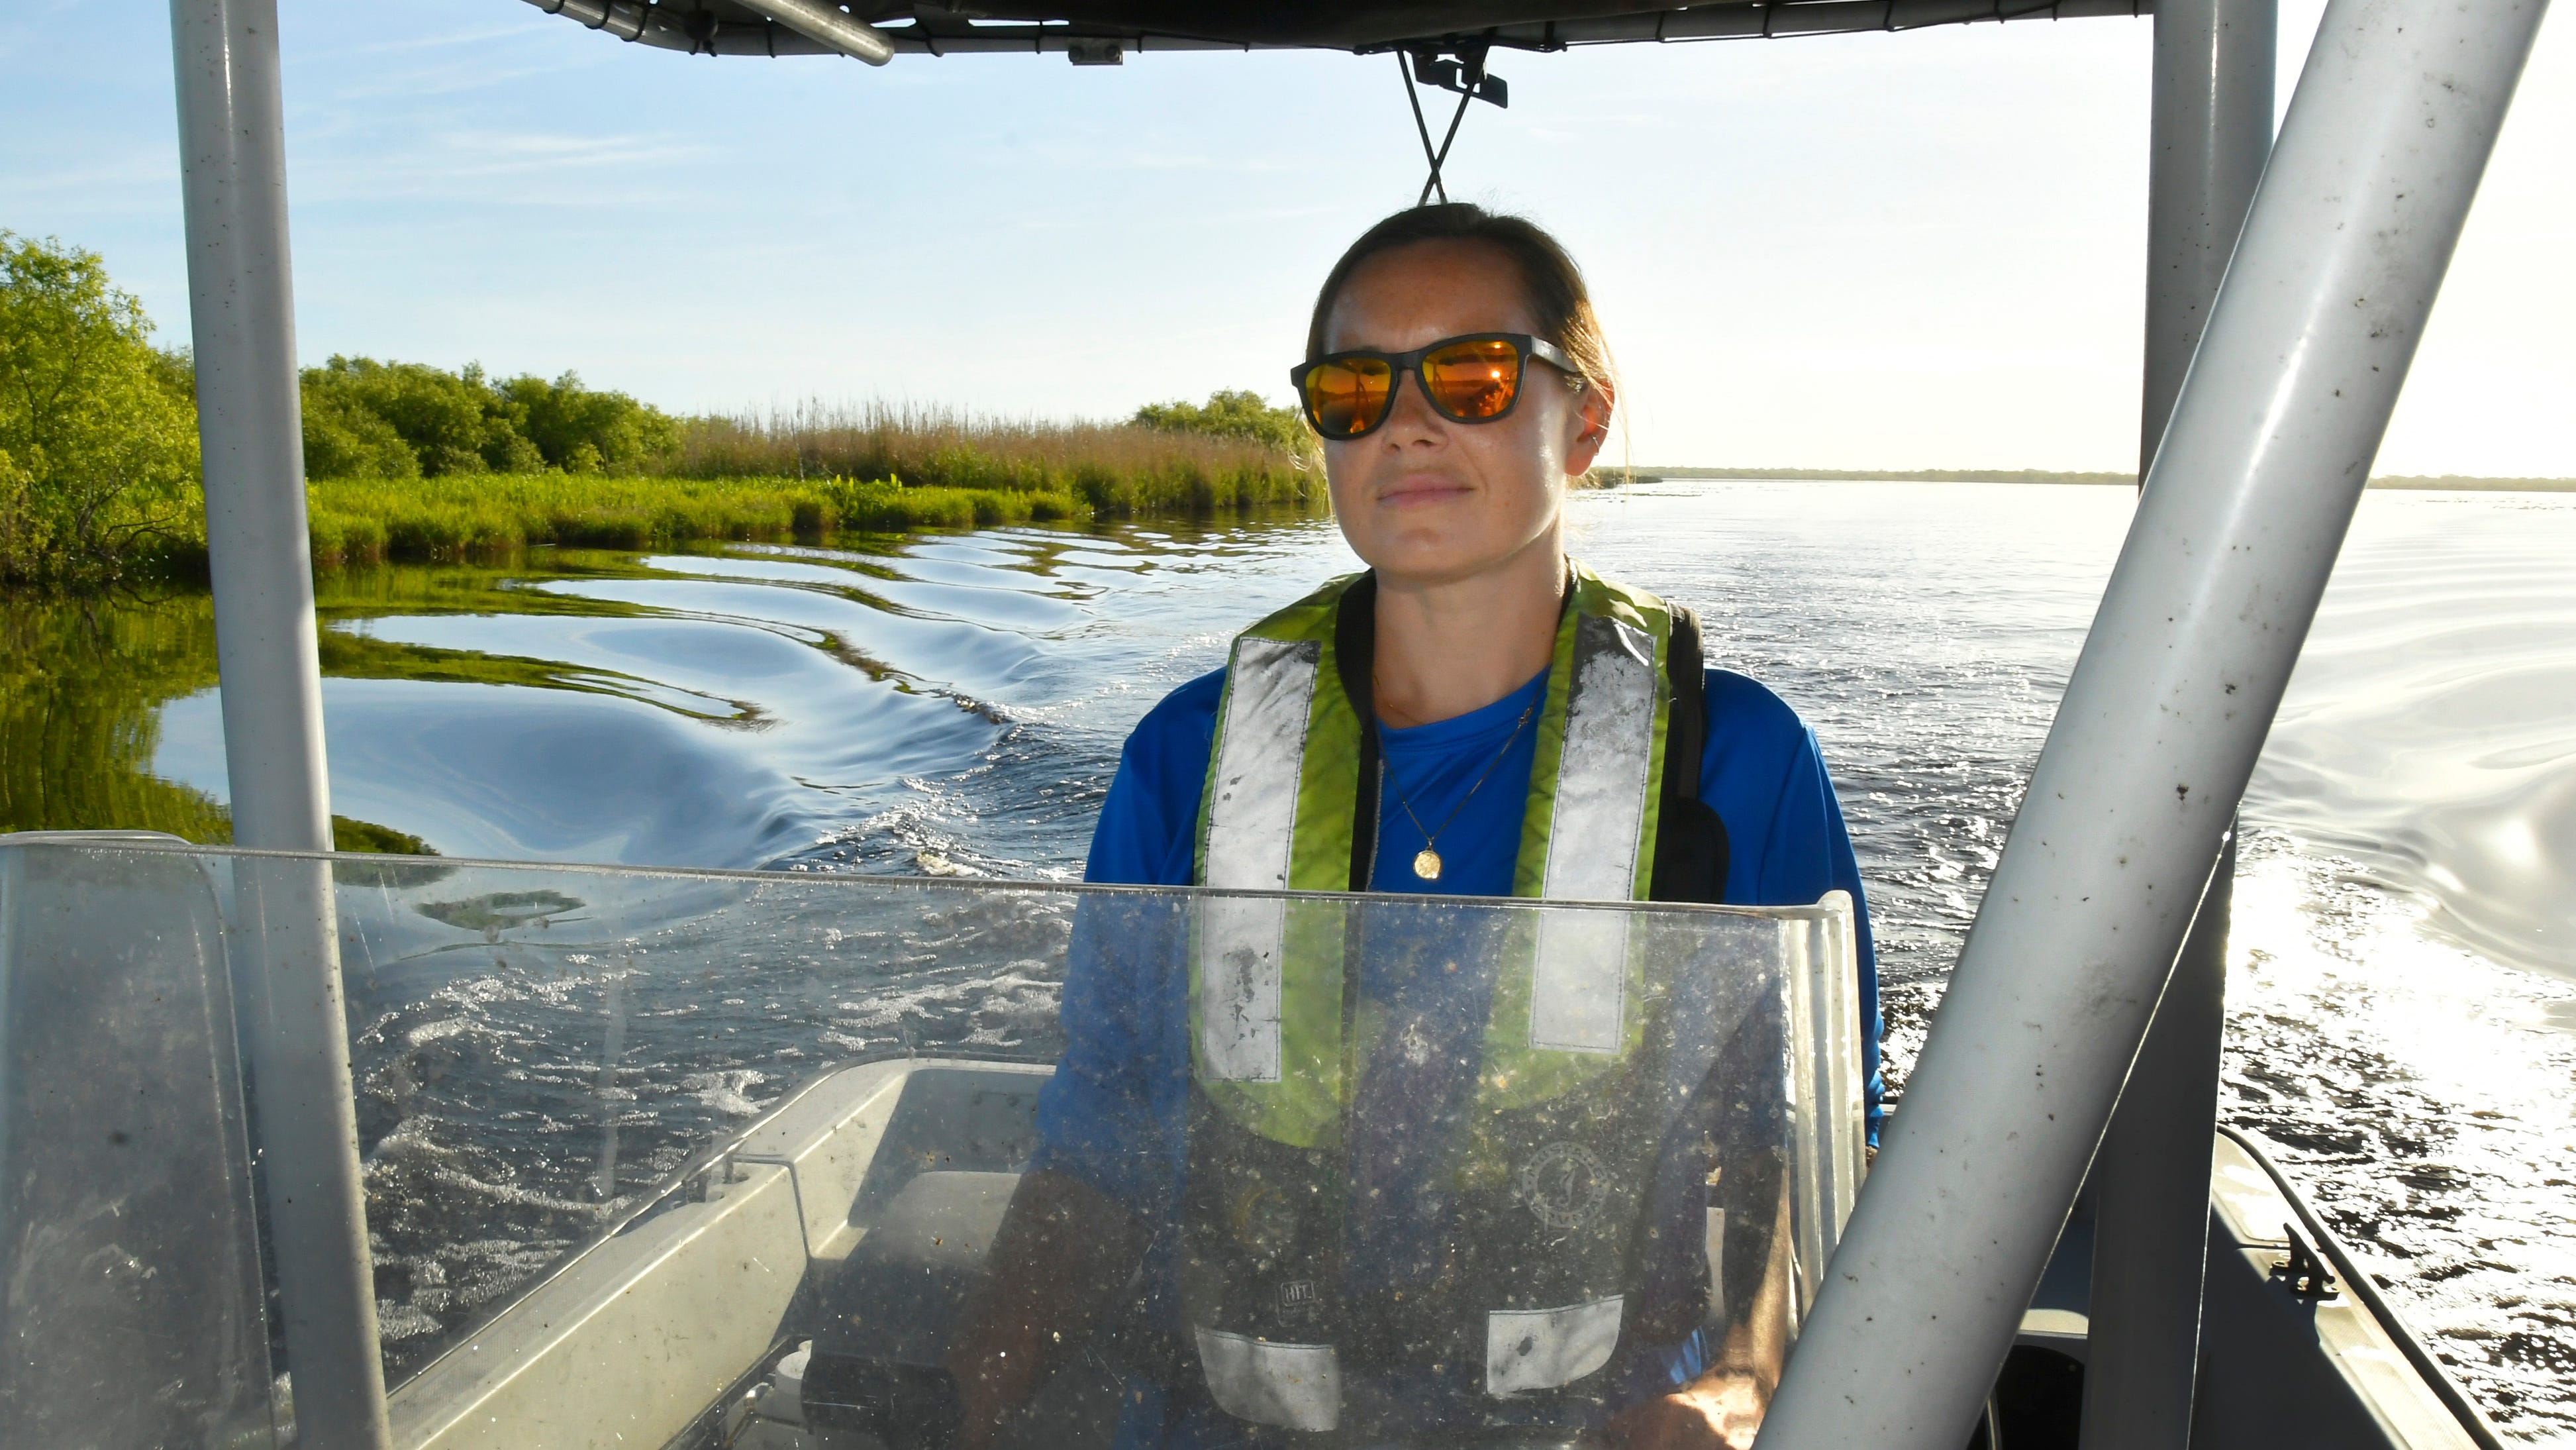 Carolyn Vanzo, environmental scientist II. Environmental scientists with the St. Johns River Water Management District conduct routine tests for toxic algae in Lake Washington, which is the main source e of drinking water for the city of Melbourne. There were no signs of an algae bloom on the day of this test, but scientists want to know whether toxic algae blooms are happening more frequently or in higher concentrations in the lake.